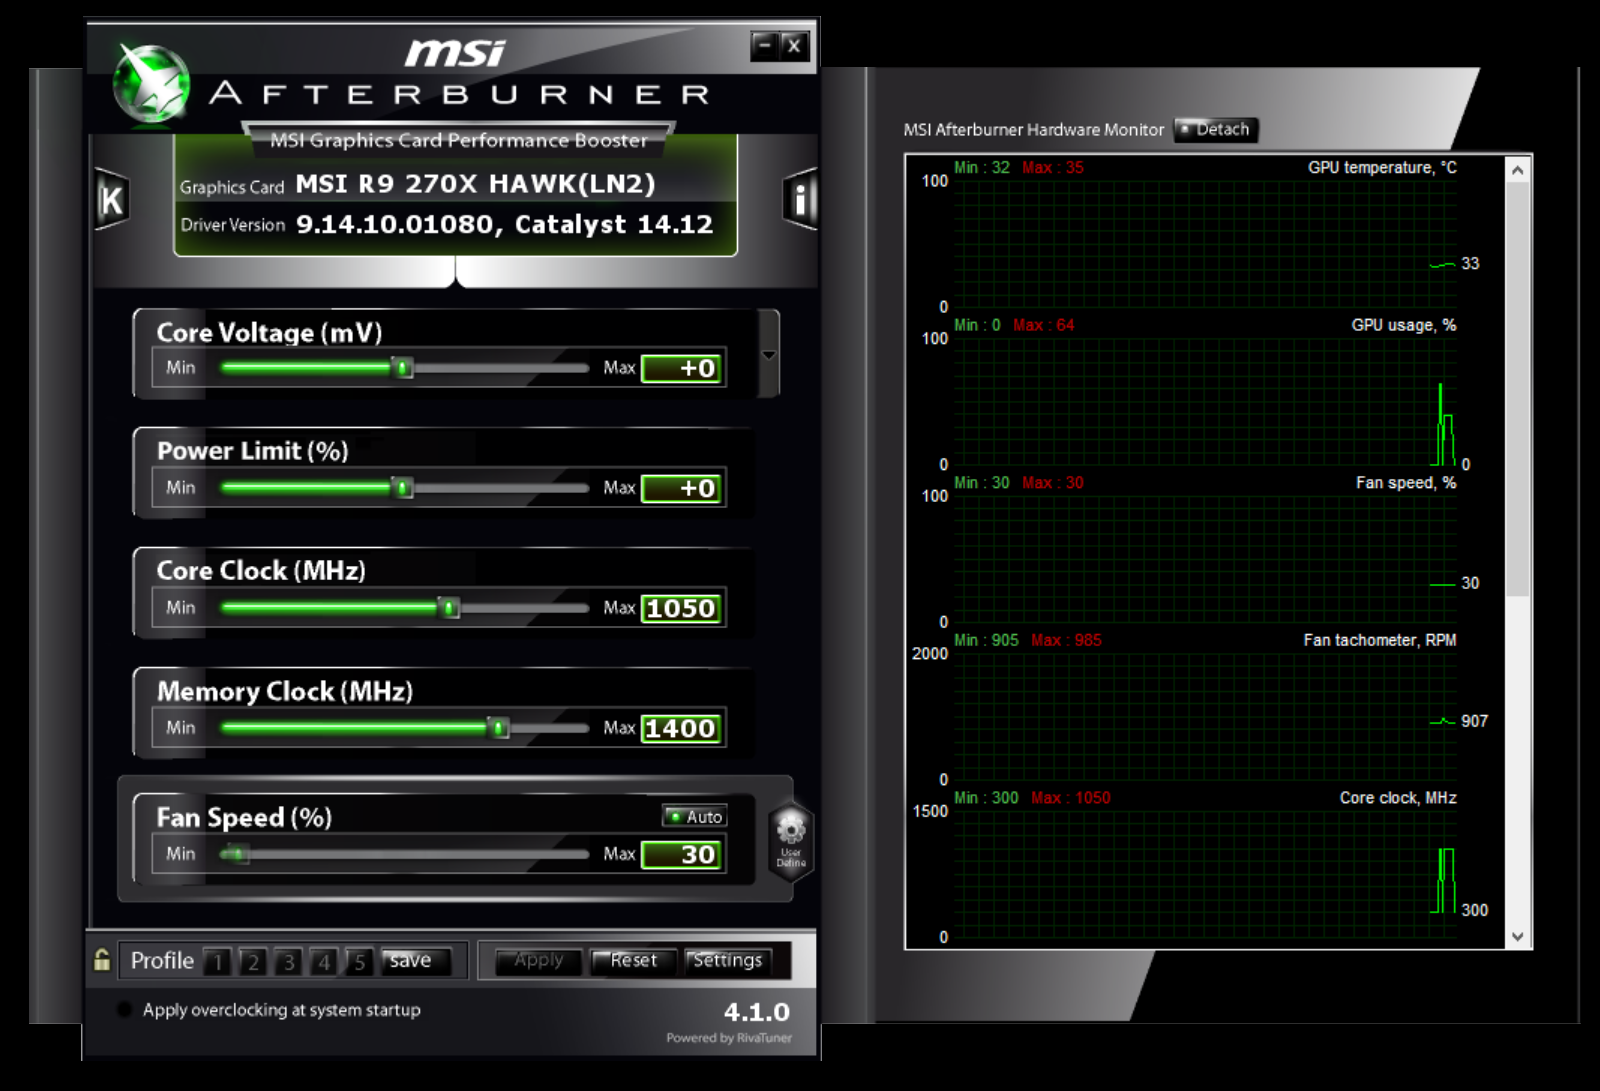 Media asset in full size related to 3dfxzone.it news item entitled as follows: Video Card Overclocking & Monitoring: MSI Afterburner 4.3.0 beta 3 | Image Name: news24329_msi-afterburner-interface_1.png